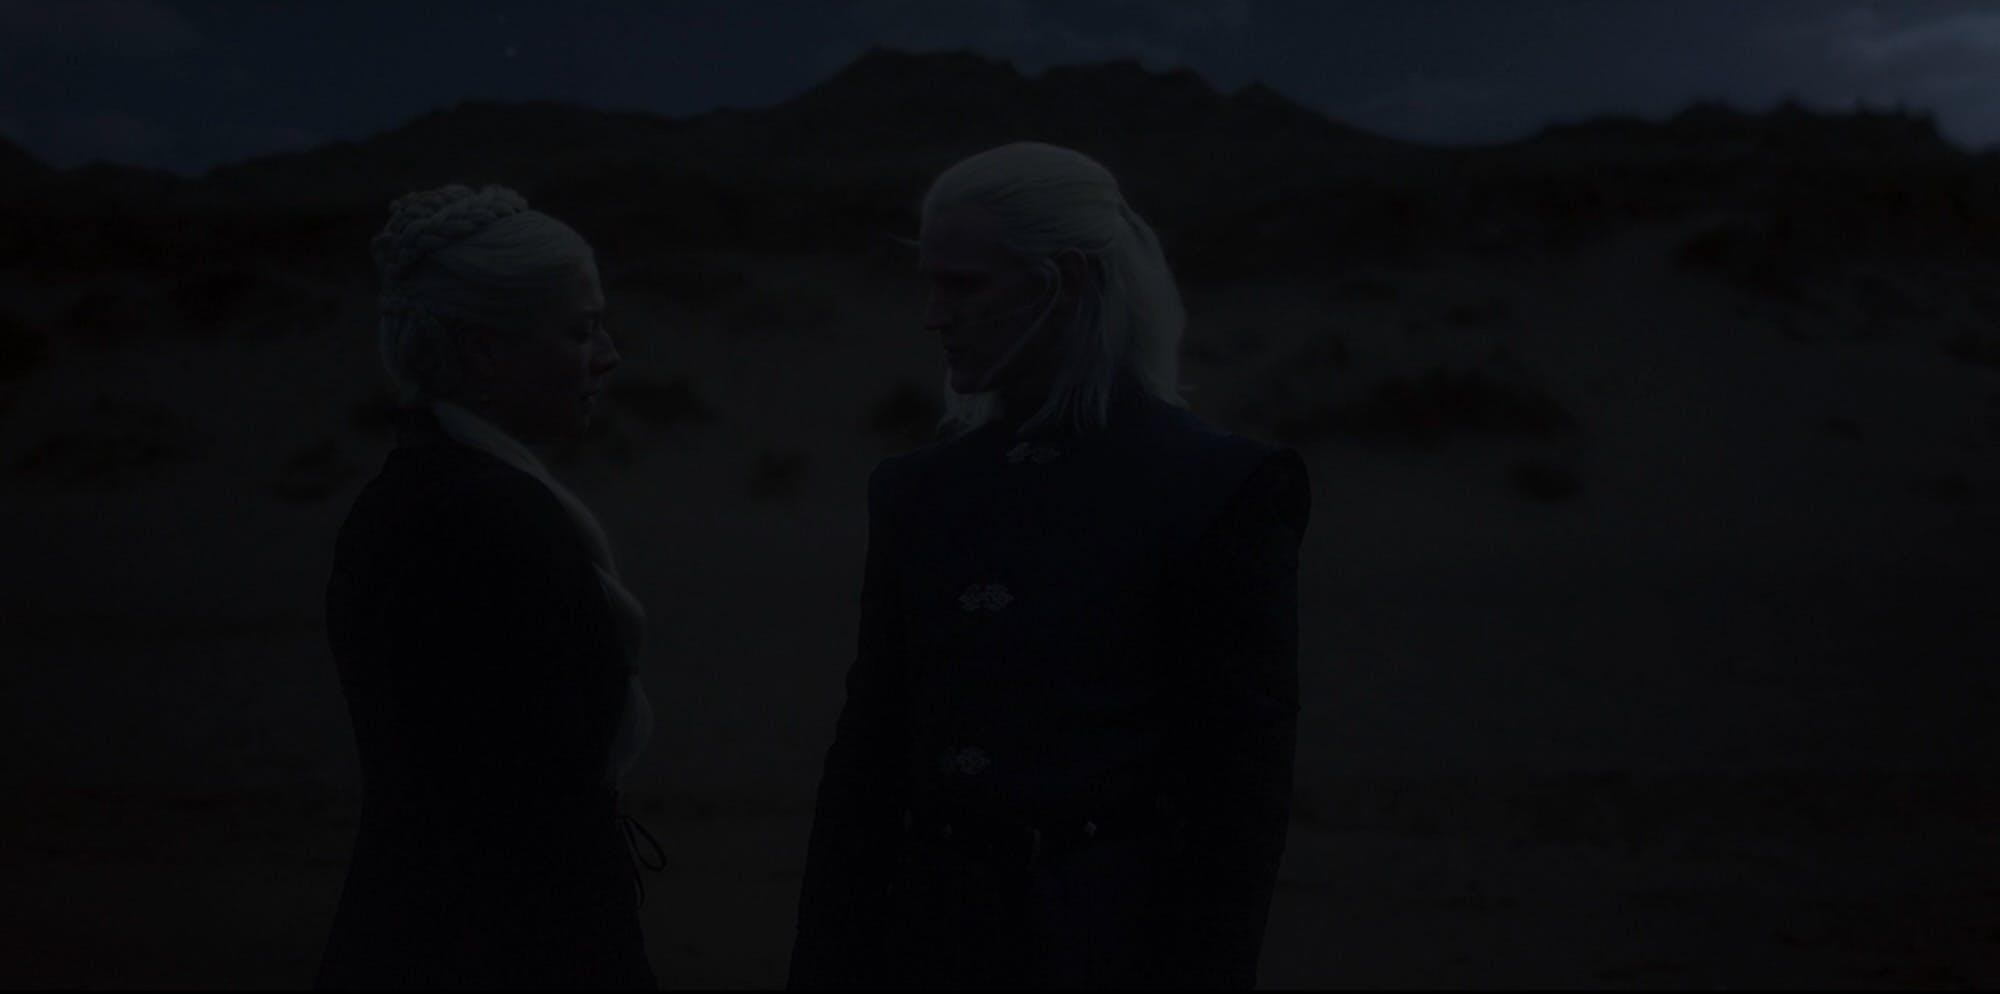 rhaenyra (left) and daemon (right) in house of the dragon